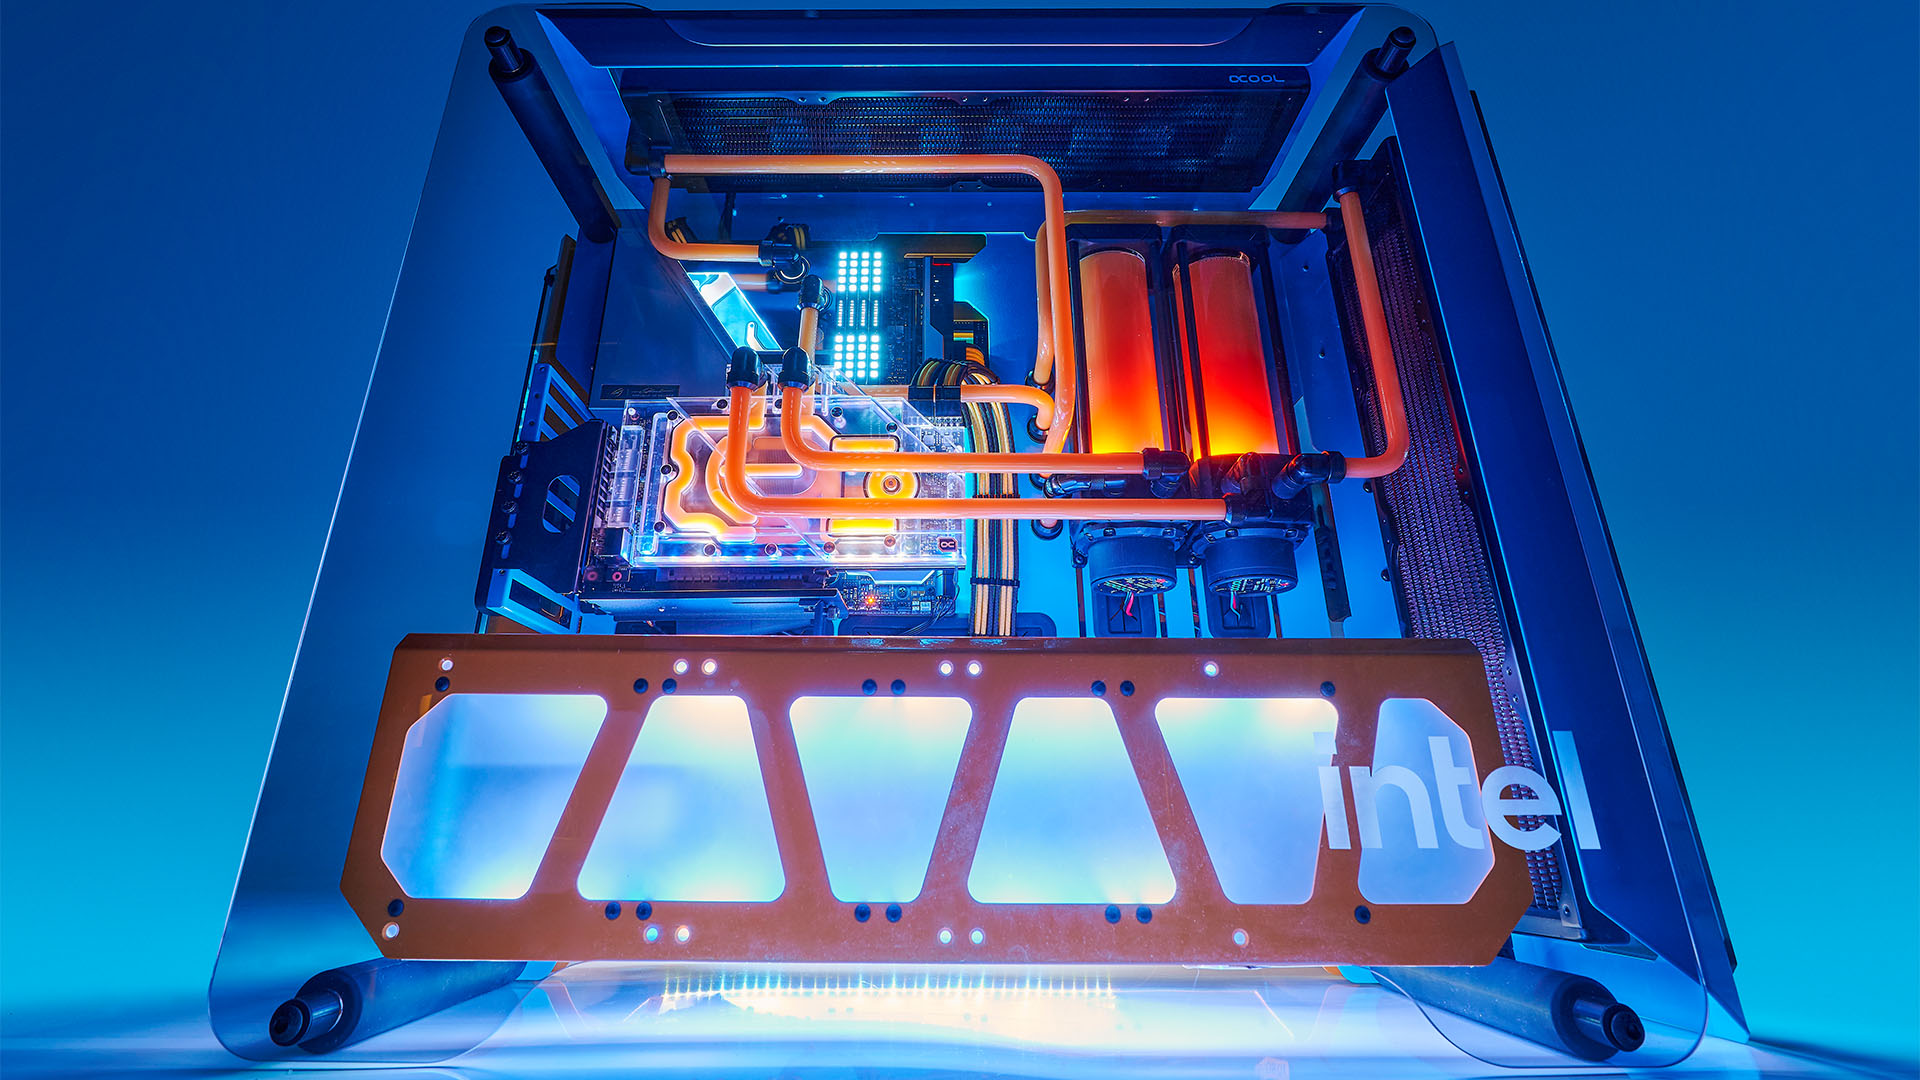 The inside of the intel gamer days gaming pc